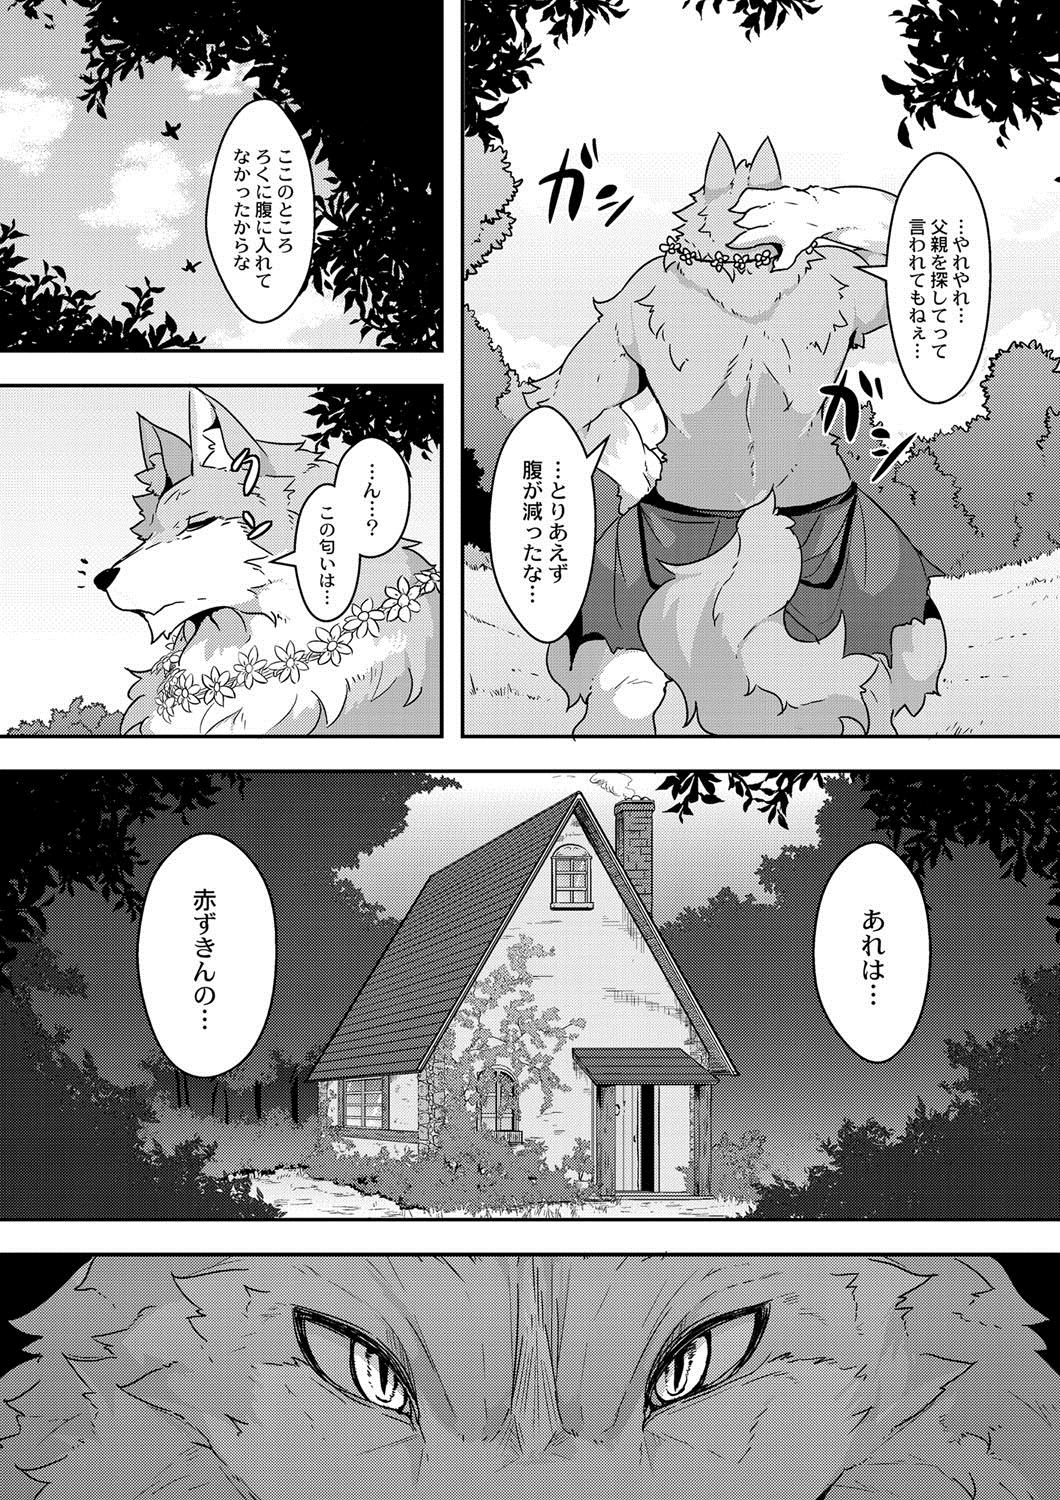 Foreskin Red Riding Hood Collection - Dragon ball gt Morocha - Page 3